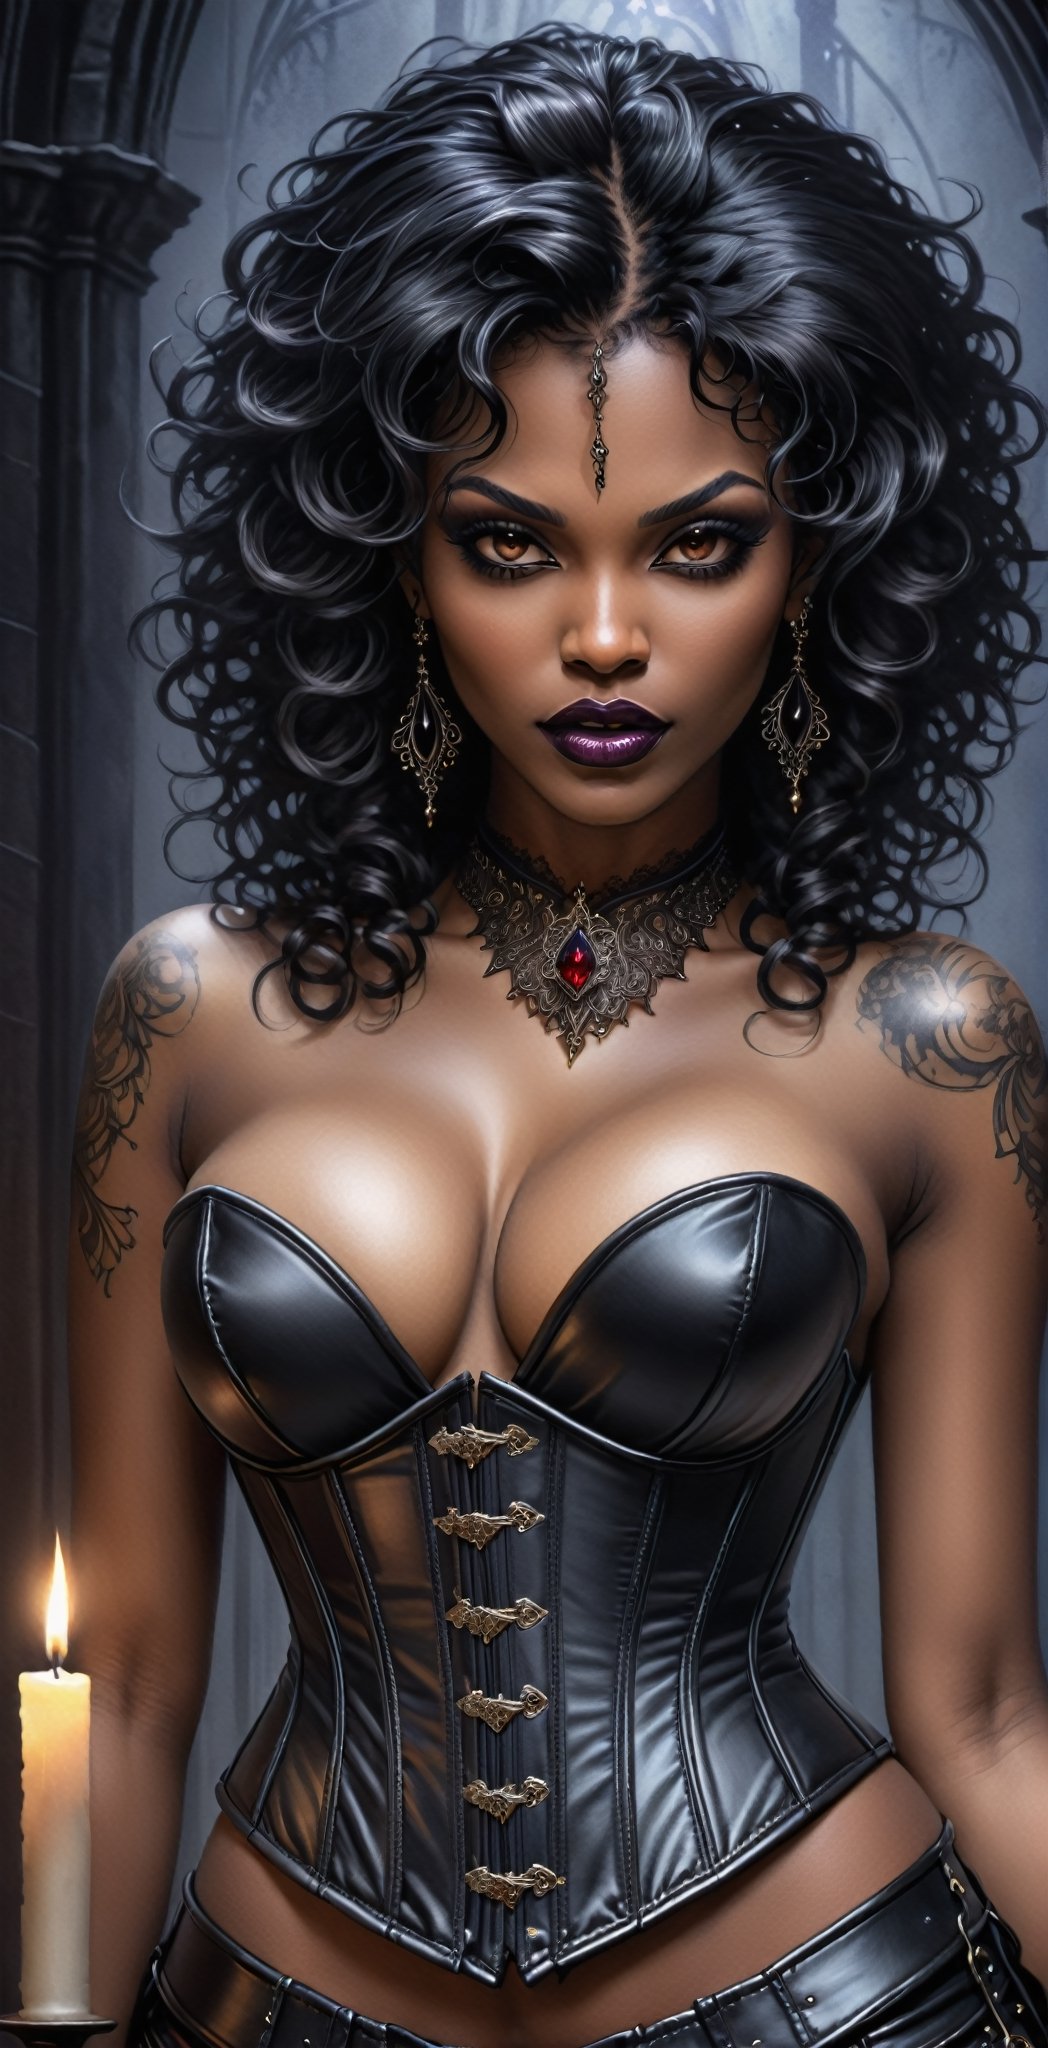 VAMPYRE GIRL,(Upper body view) Tattoo sketch, by enki bilal, high quality, high detail, (16K Ultra HD), (masterpiece), (best quality), (ultra realistic detail).(Black African Female)[[[DARK SKINNED]]] (beautiful girl), (black curly hair with dark roots)(((STRAIGHT HAIR))), dark eye shadow,dark candle lit gothic cathedral background, massive breasts, deep cleavage, necklace, earrings, (((BLACK LEATHER HIGHLY DETAILED CORSET TOP)))(Deep neckline to waist shirt)DonMF43XL, .SLB.,p3rfect boobs